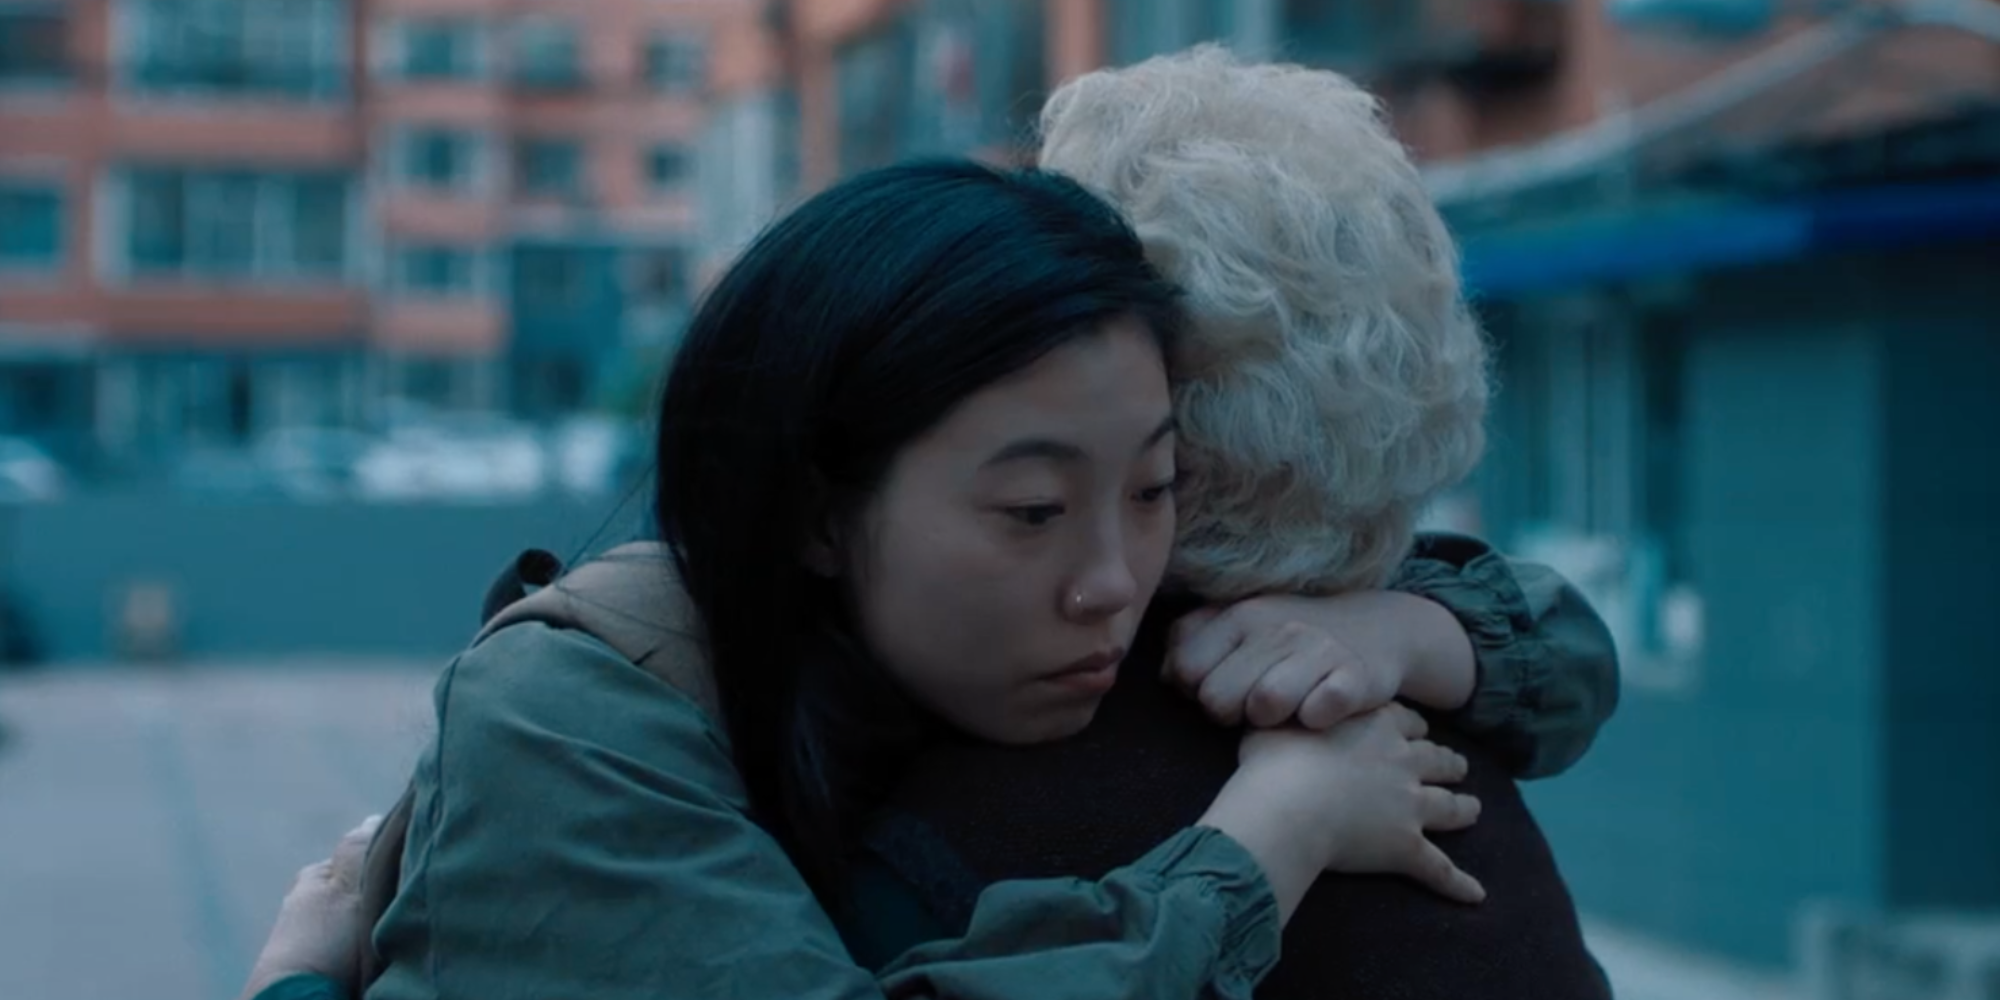 Still of Awkwafina hugging her fictional her grandmother in The Farewell movie